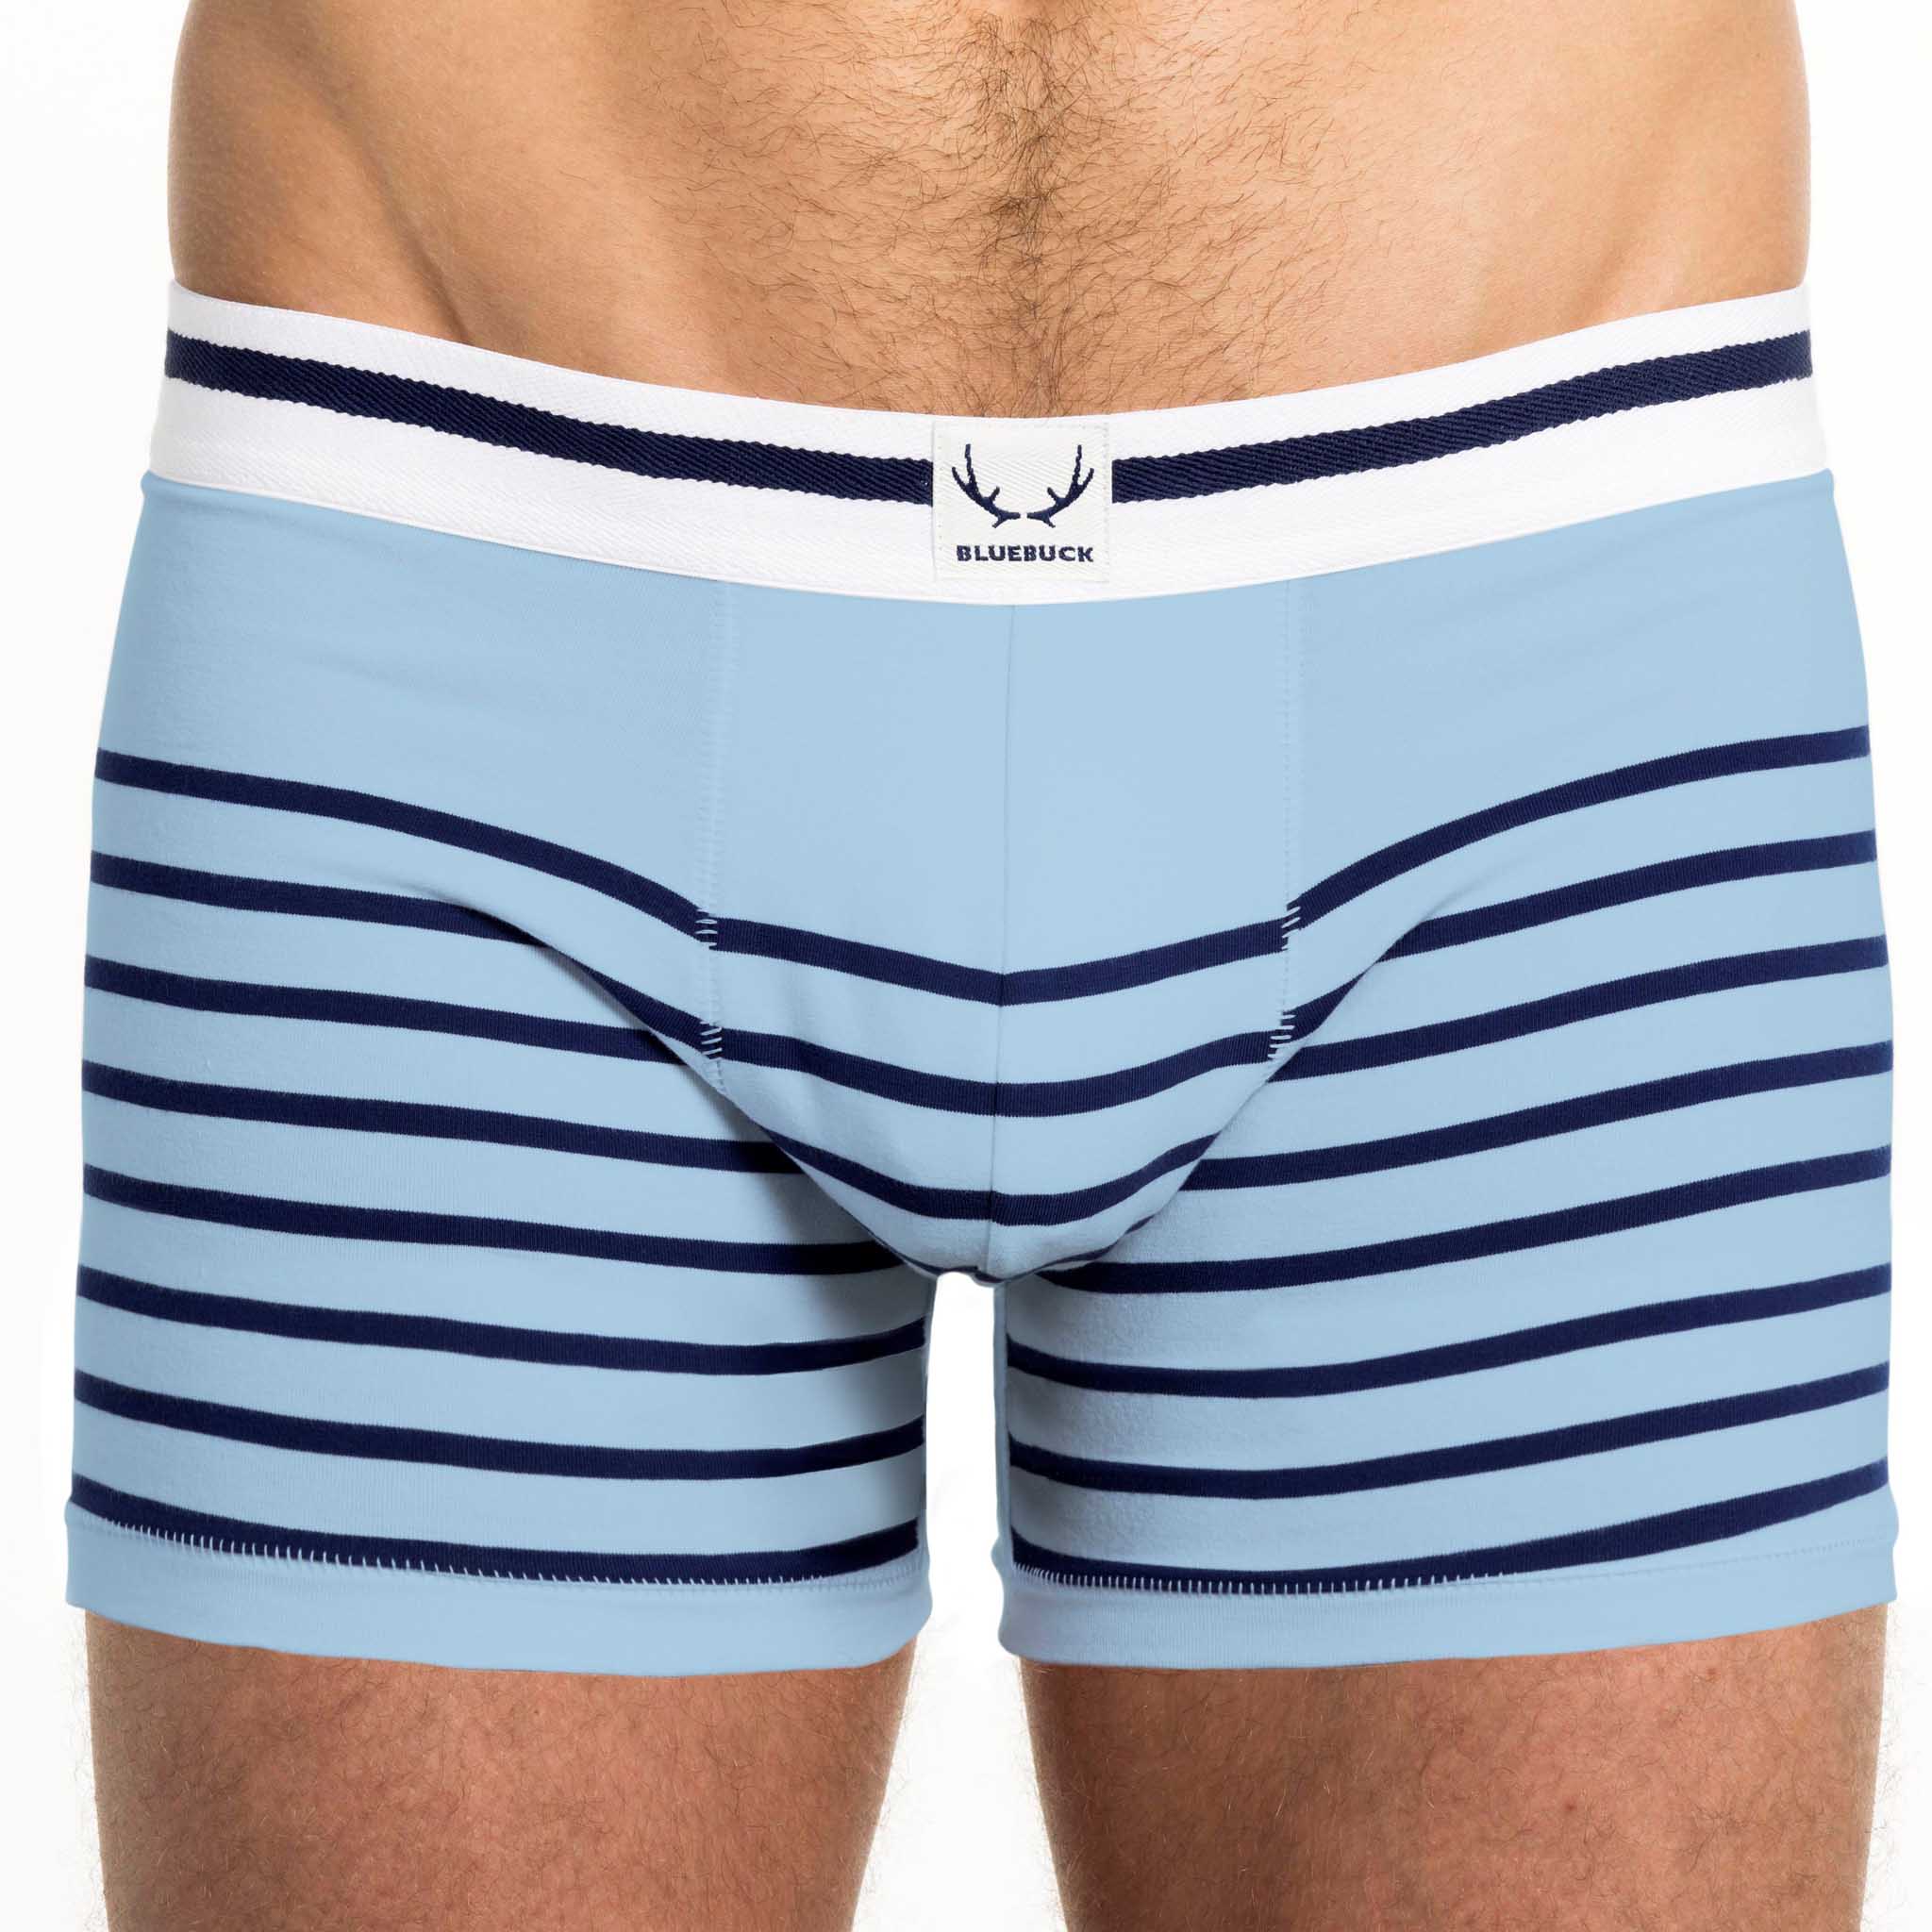 Blue and black striped long boxer shorts made of organic cotton from Bluebuck